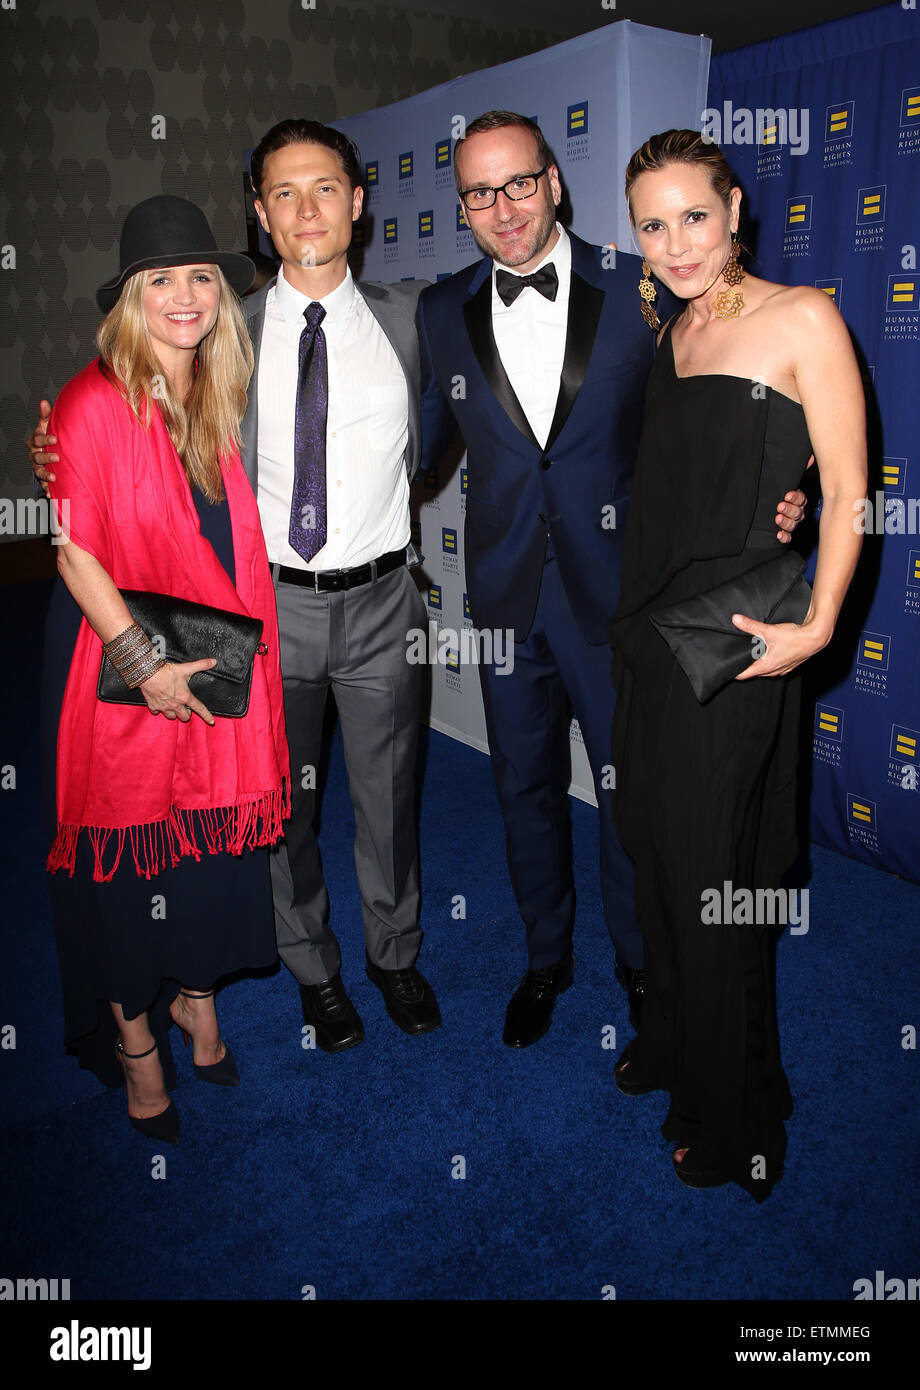 HRC Los Angeles Gala Dinner 2015 at the JW Marriott Hotel at LA Live - Arrivals  Featuring: Clare Munn, Elijah Allan-Blitz, Chad Griffin, Maria Bello Where: Los Angeles, California, United States When: 14 Mar 2015 Credit: FayesVision/WENN.com Stock Photo